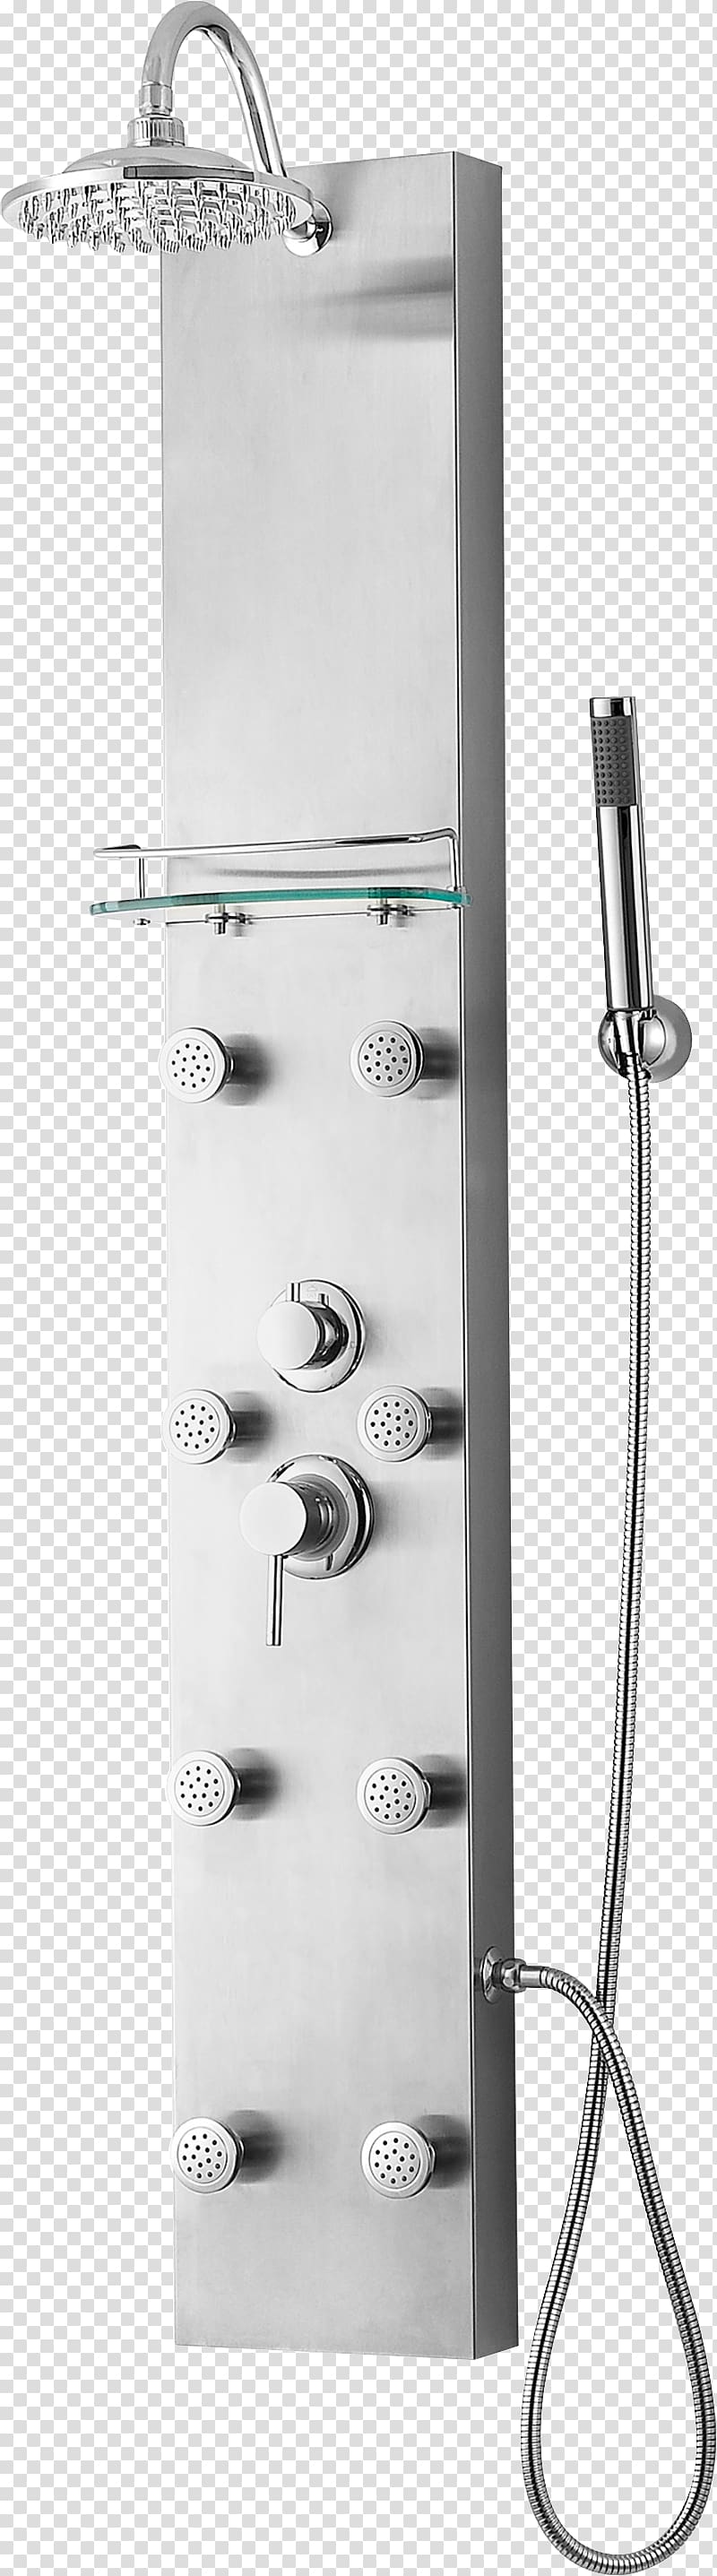 Faucet Handles & Controls Shower Thermostatic mixing valve Stainless steel Spray, bathroom wall shelves transparent background PNG clipart